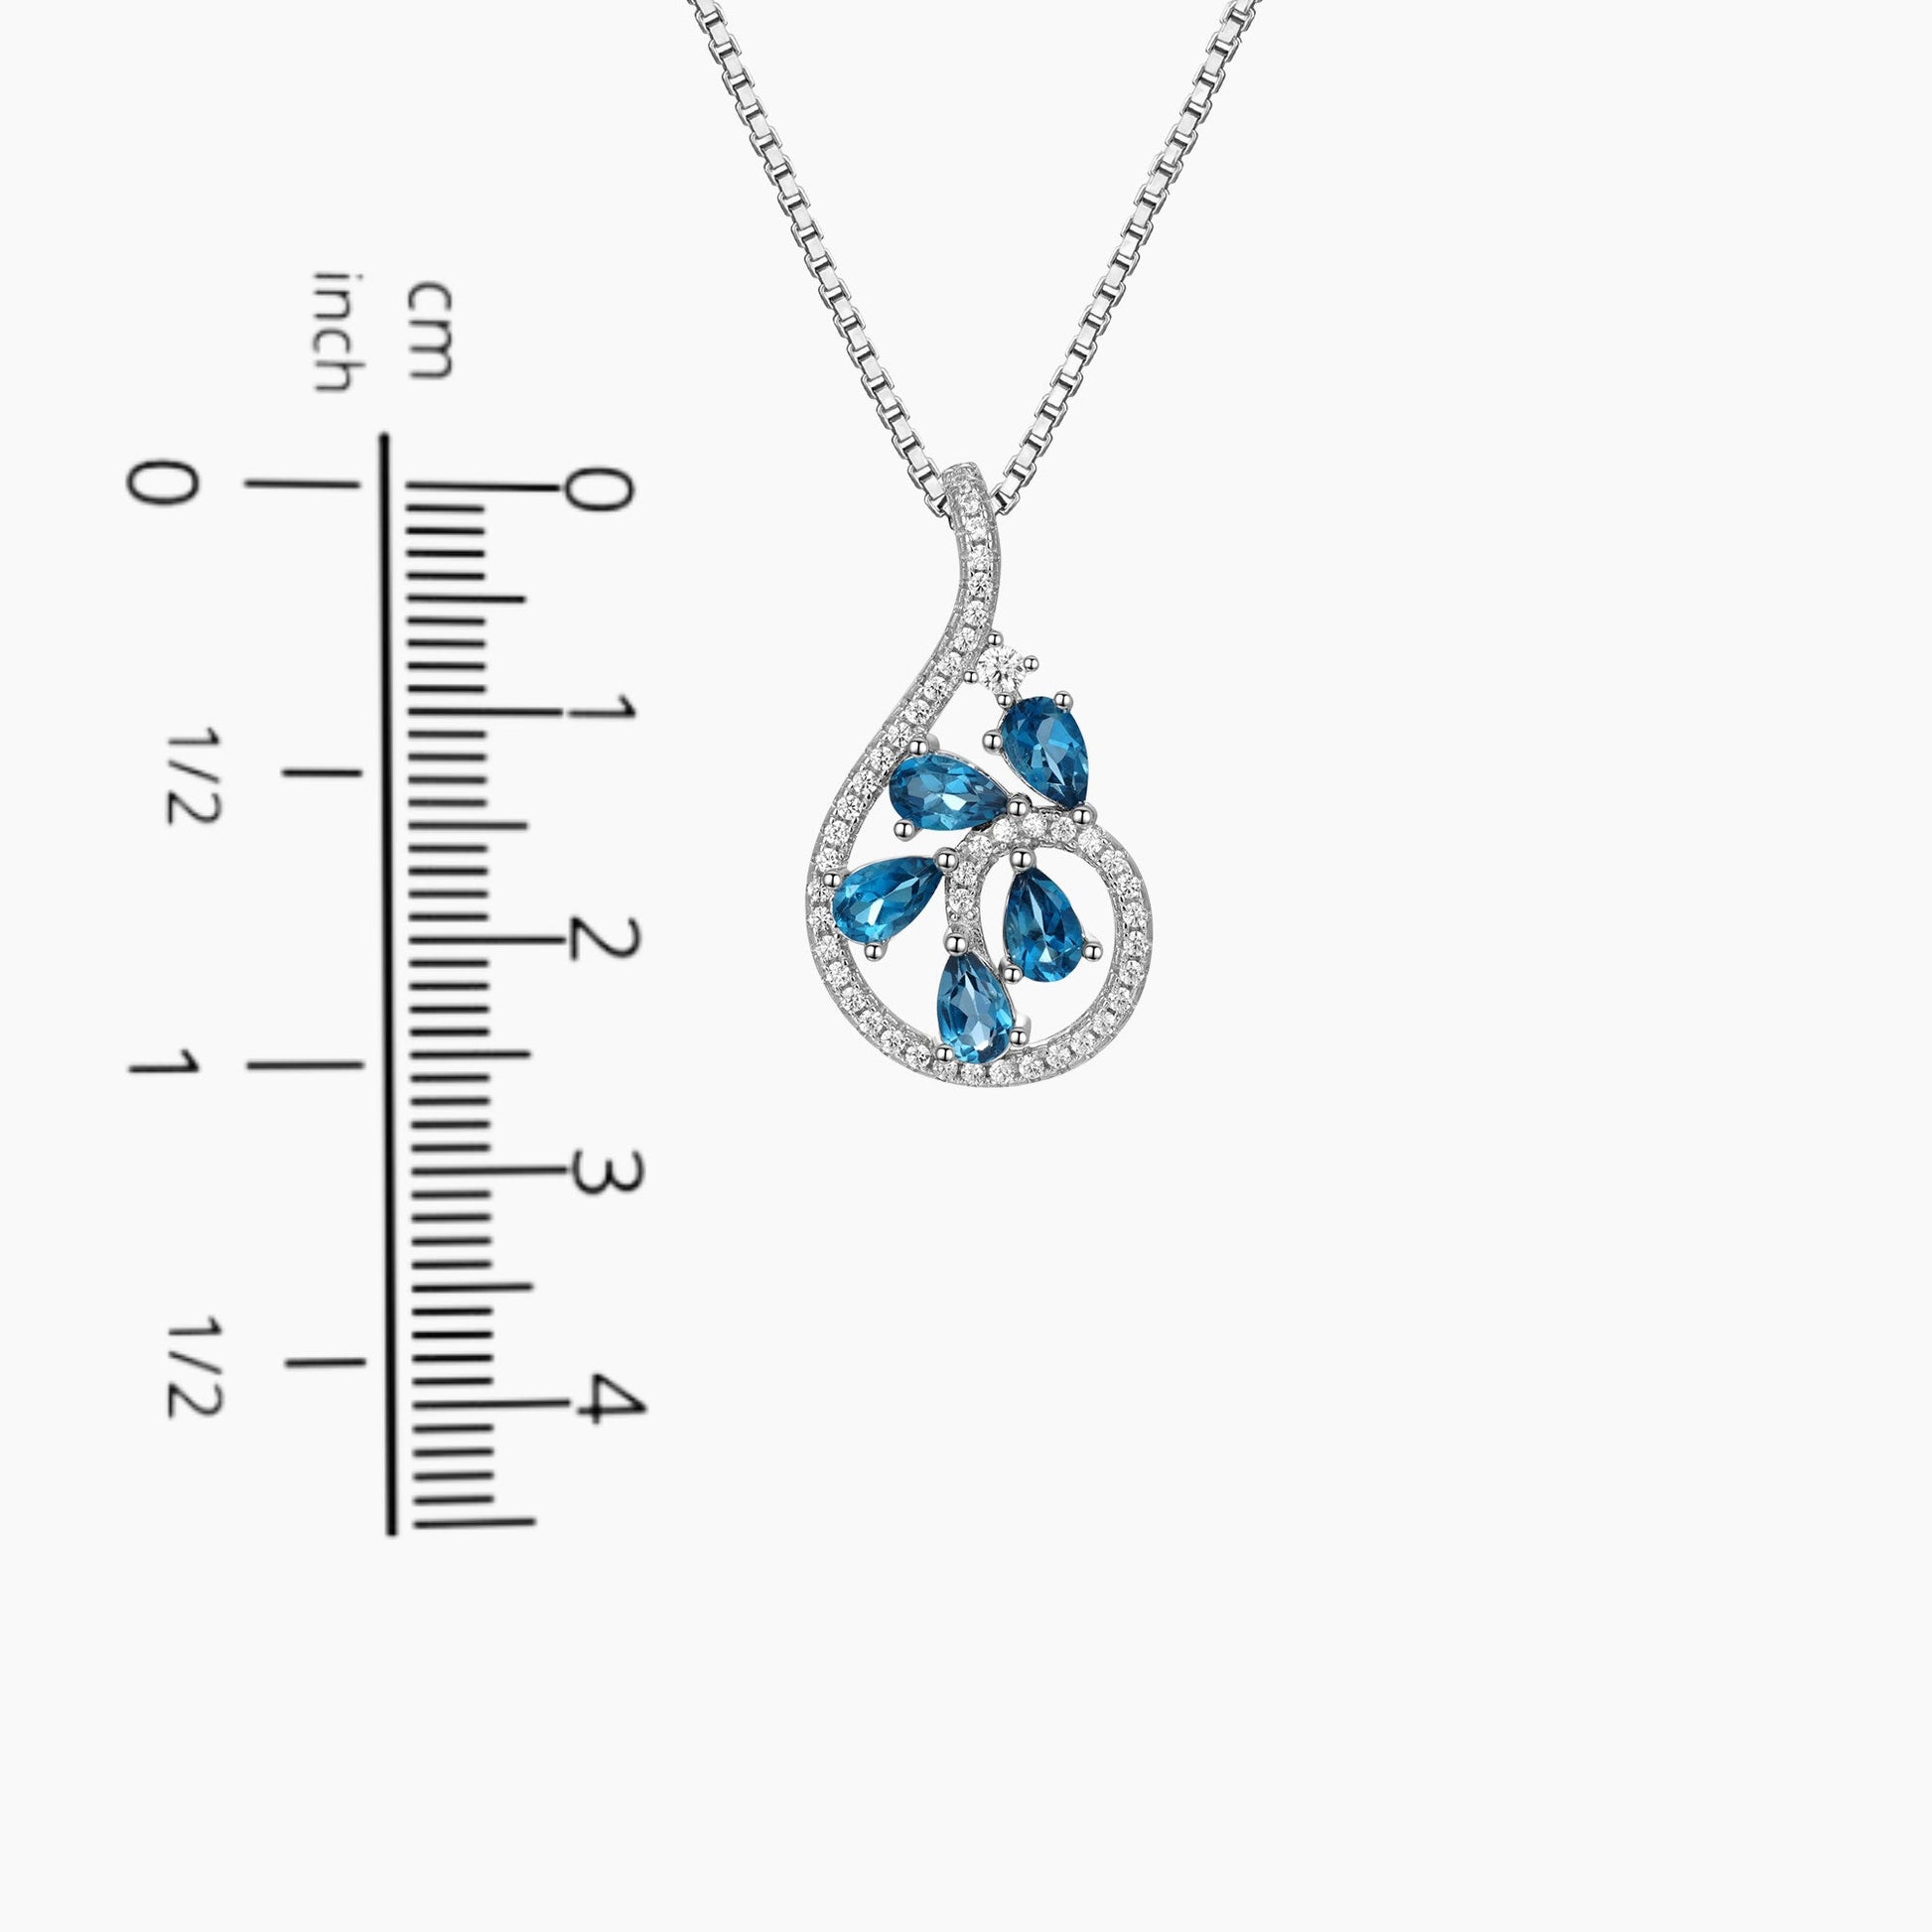 London Blue Topaz Dewdrop Pendant displayed next to a scale for size comparison